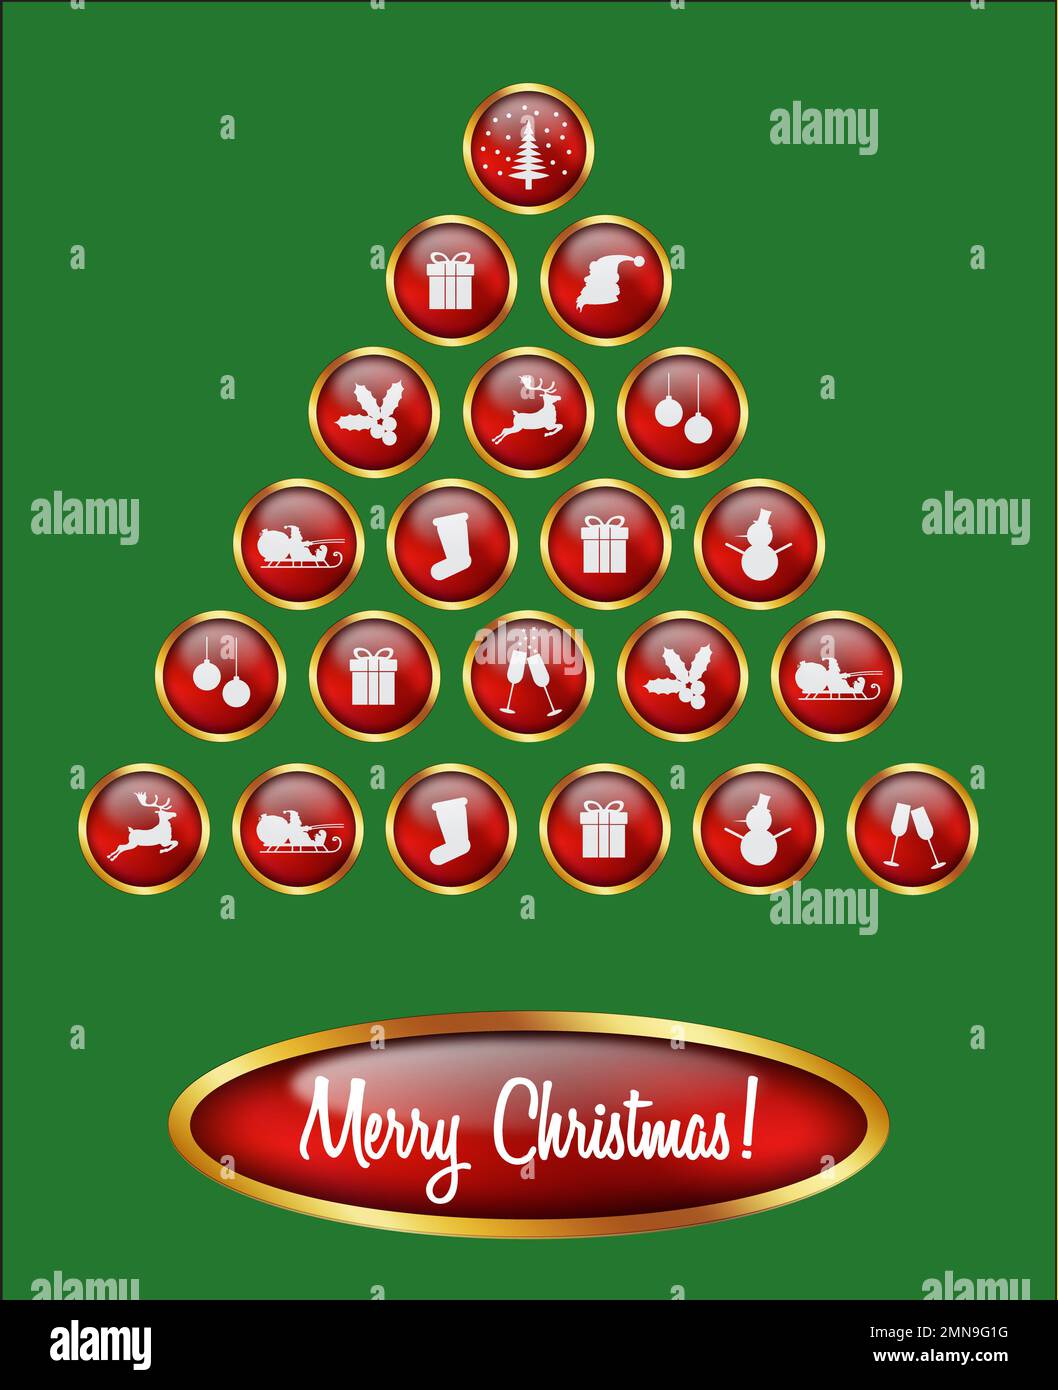 Christmas buttons forming a Christmas tree Stock Photo